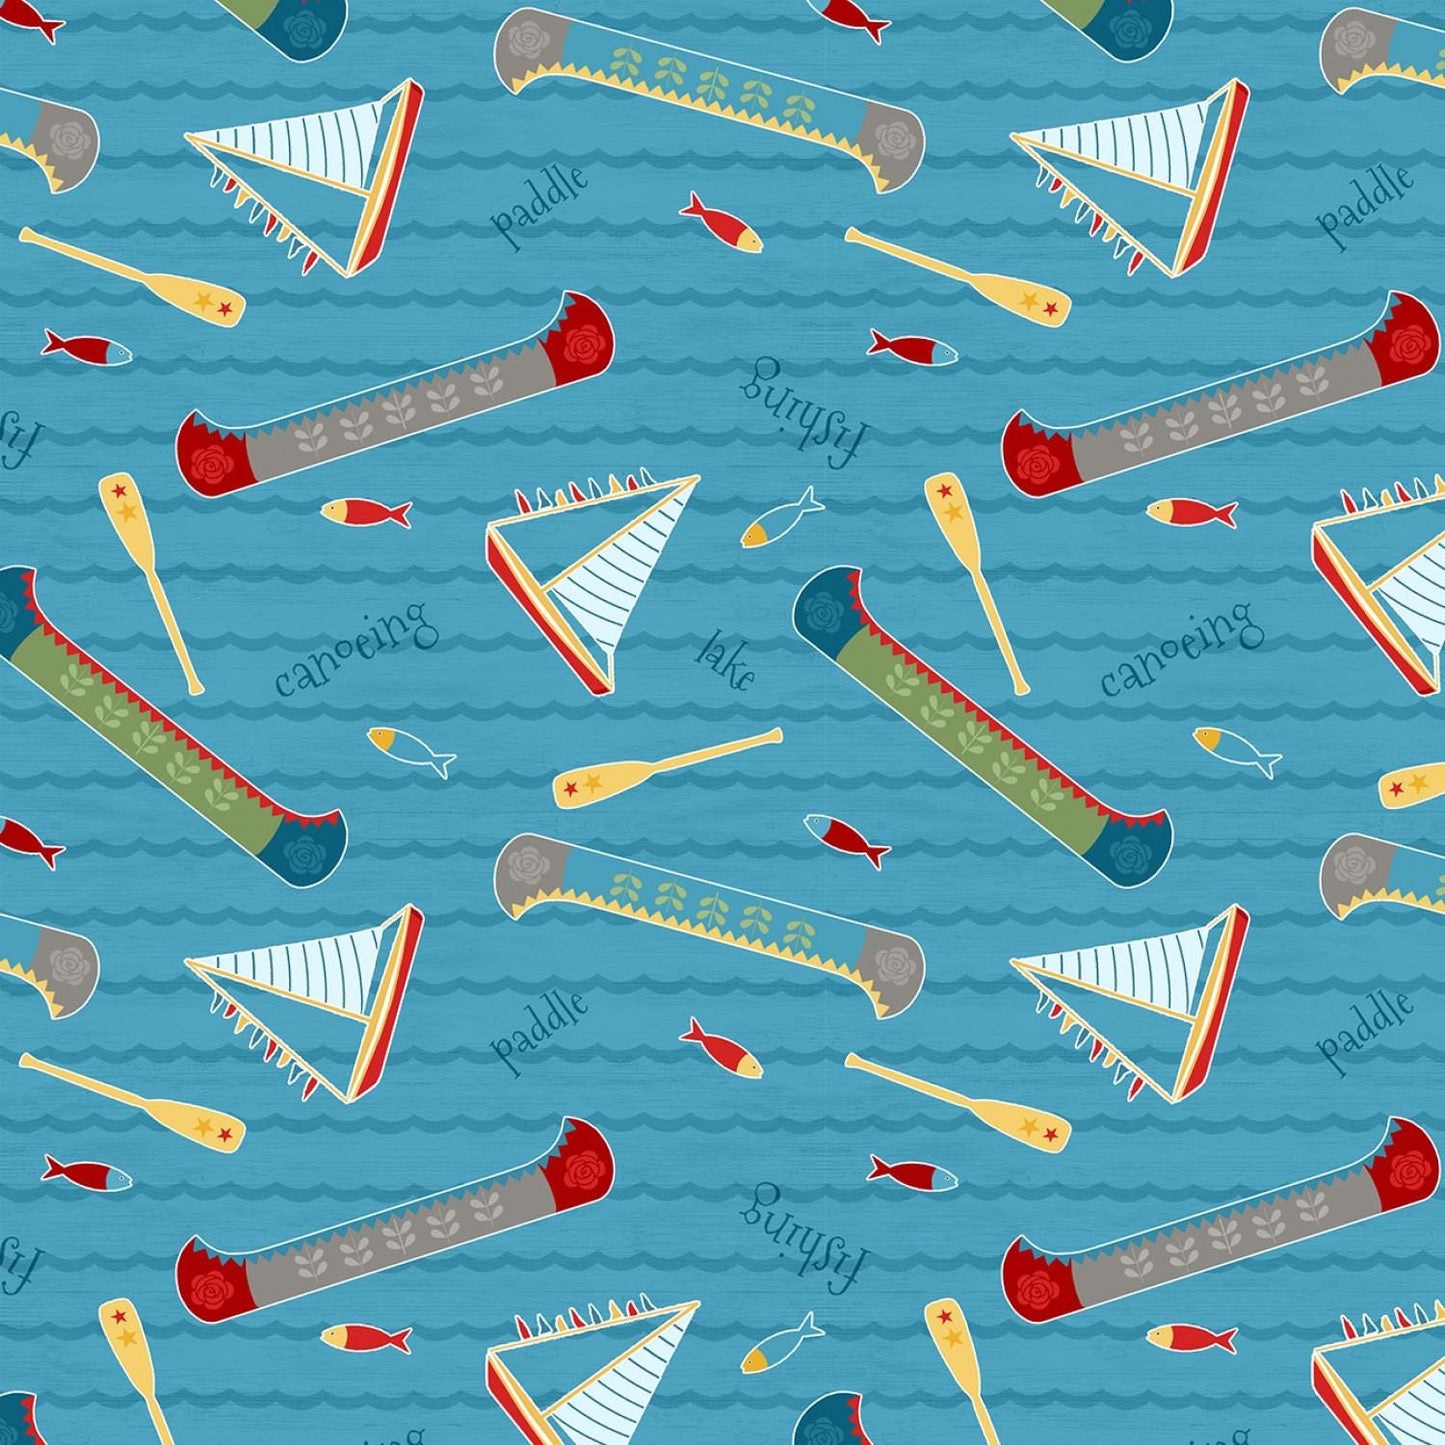 Let's Go Glamping by Anne Rowan Camping Lake Toss Blue Cotton Woven Fabric